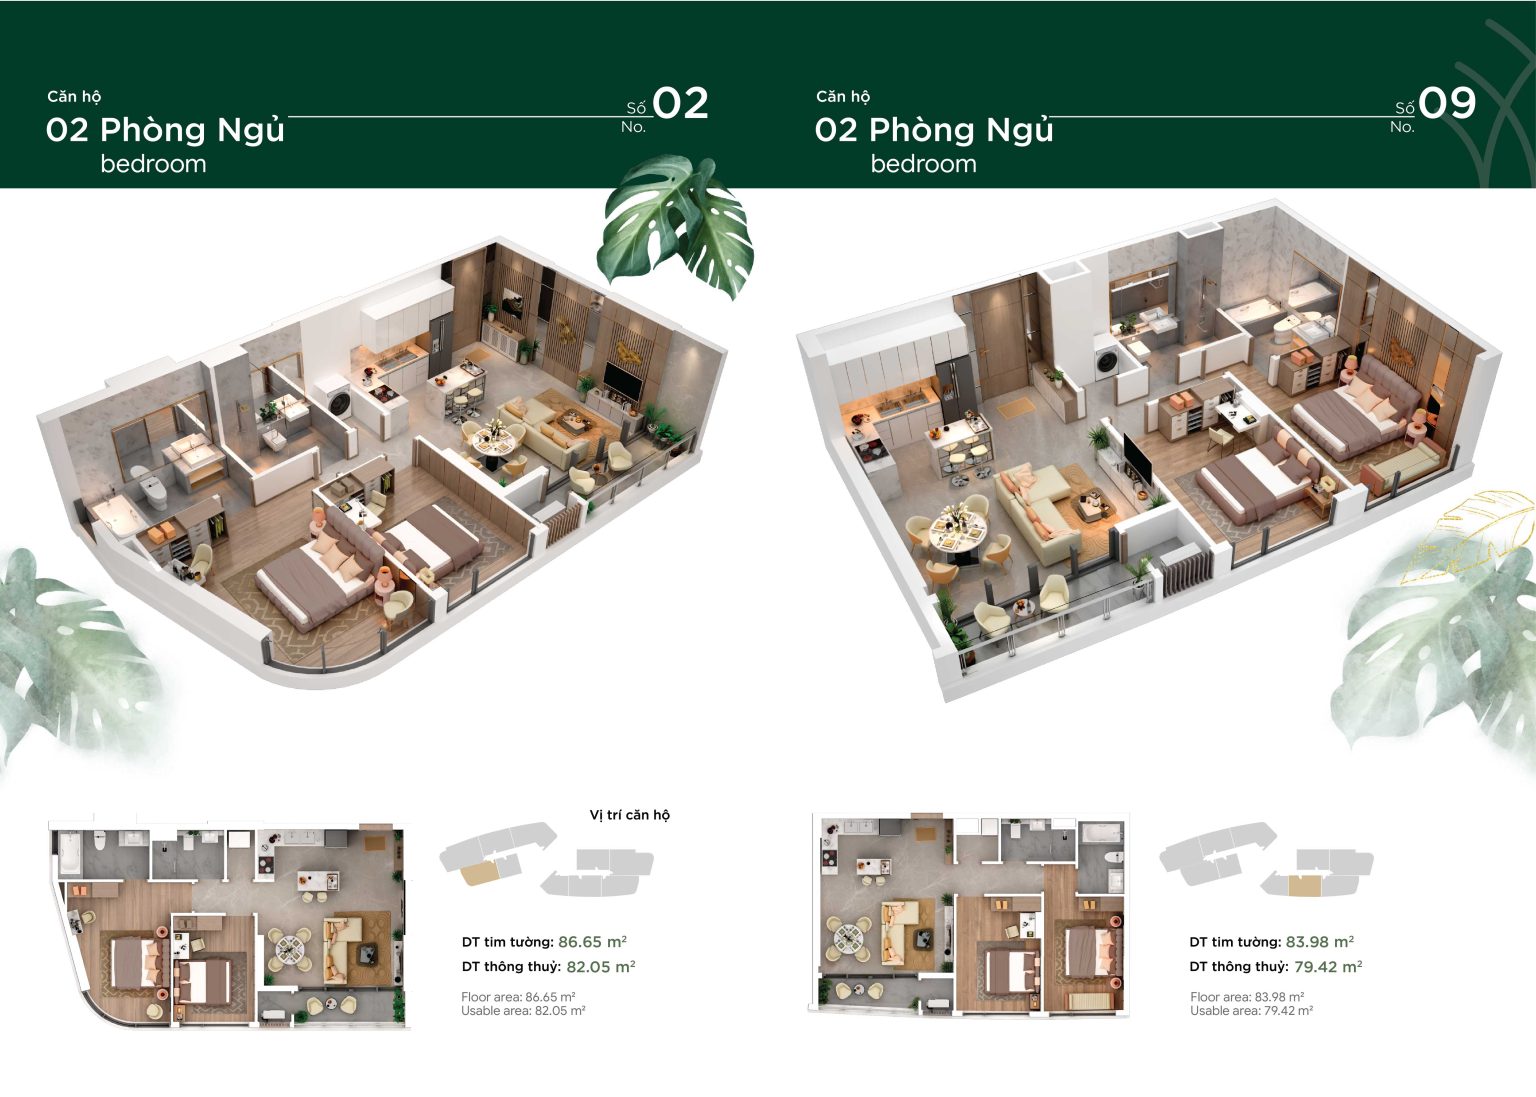 2-bedroom apartment layout of Thao Dien Green